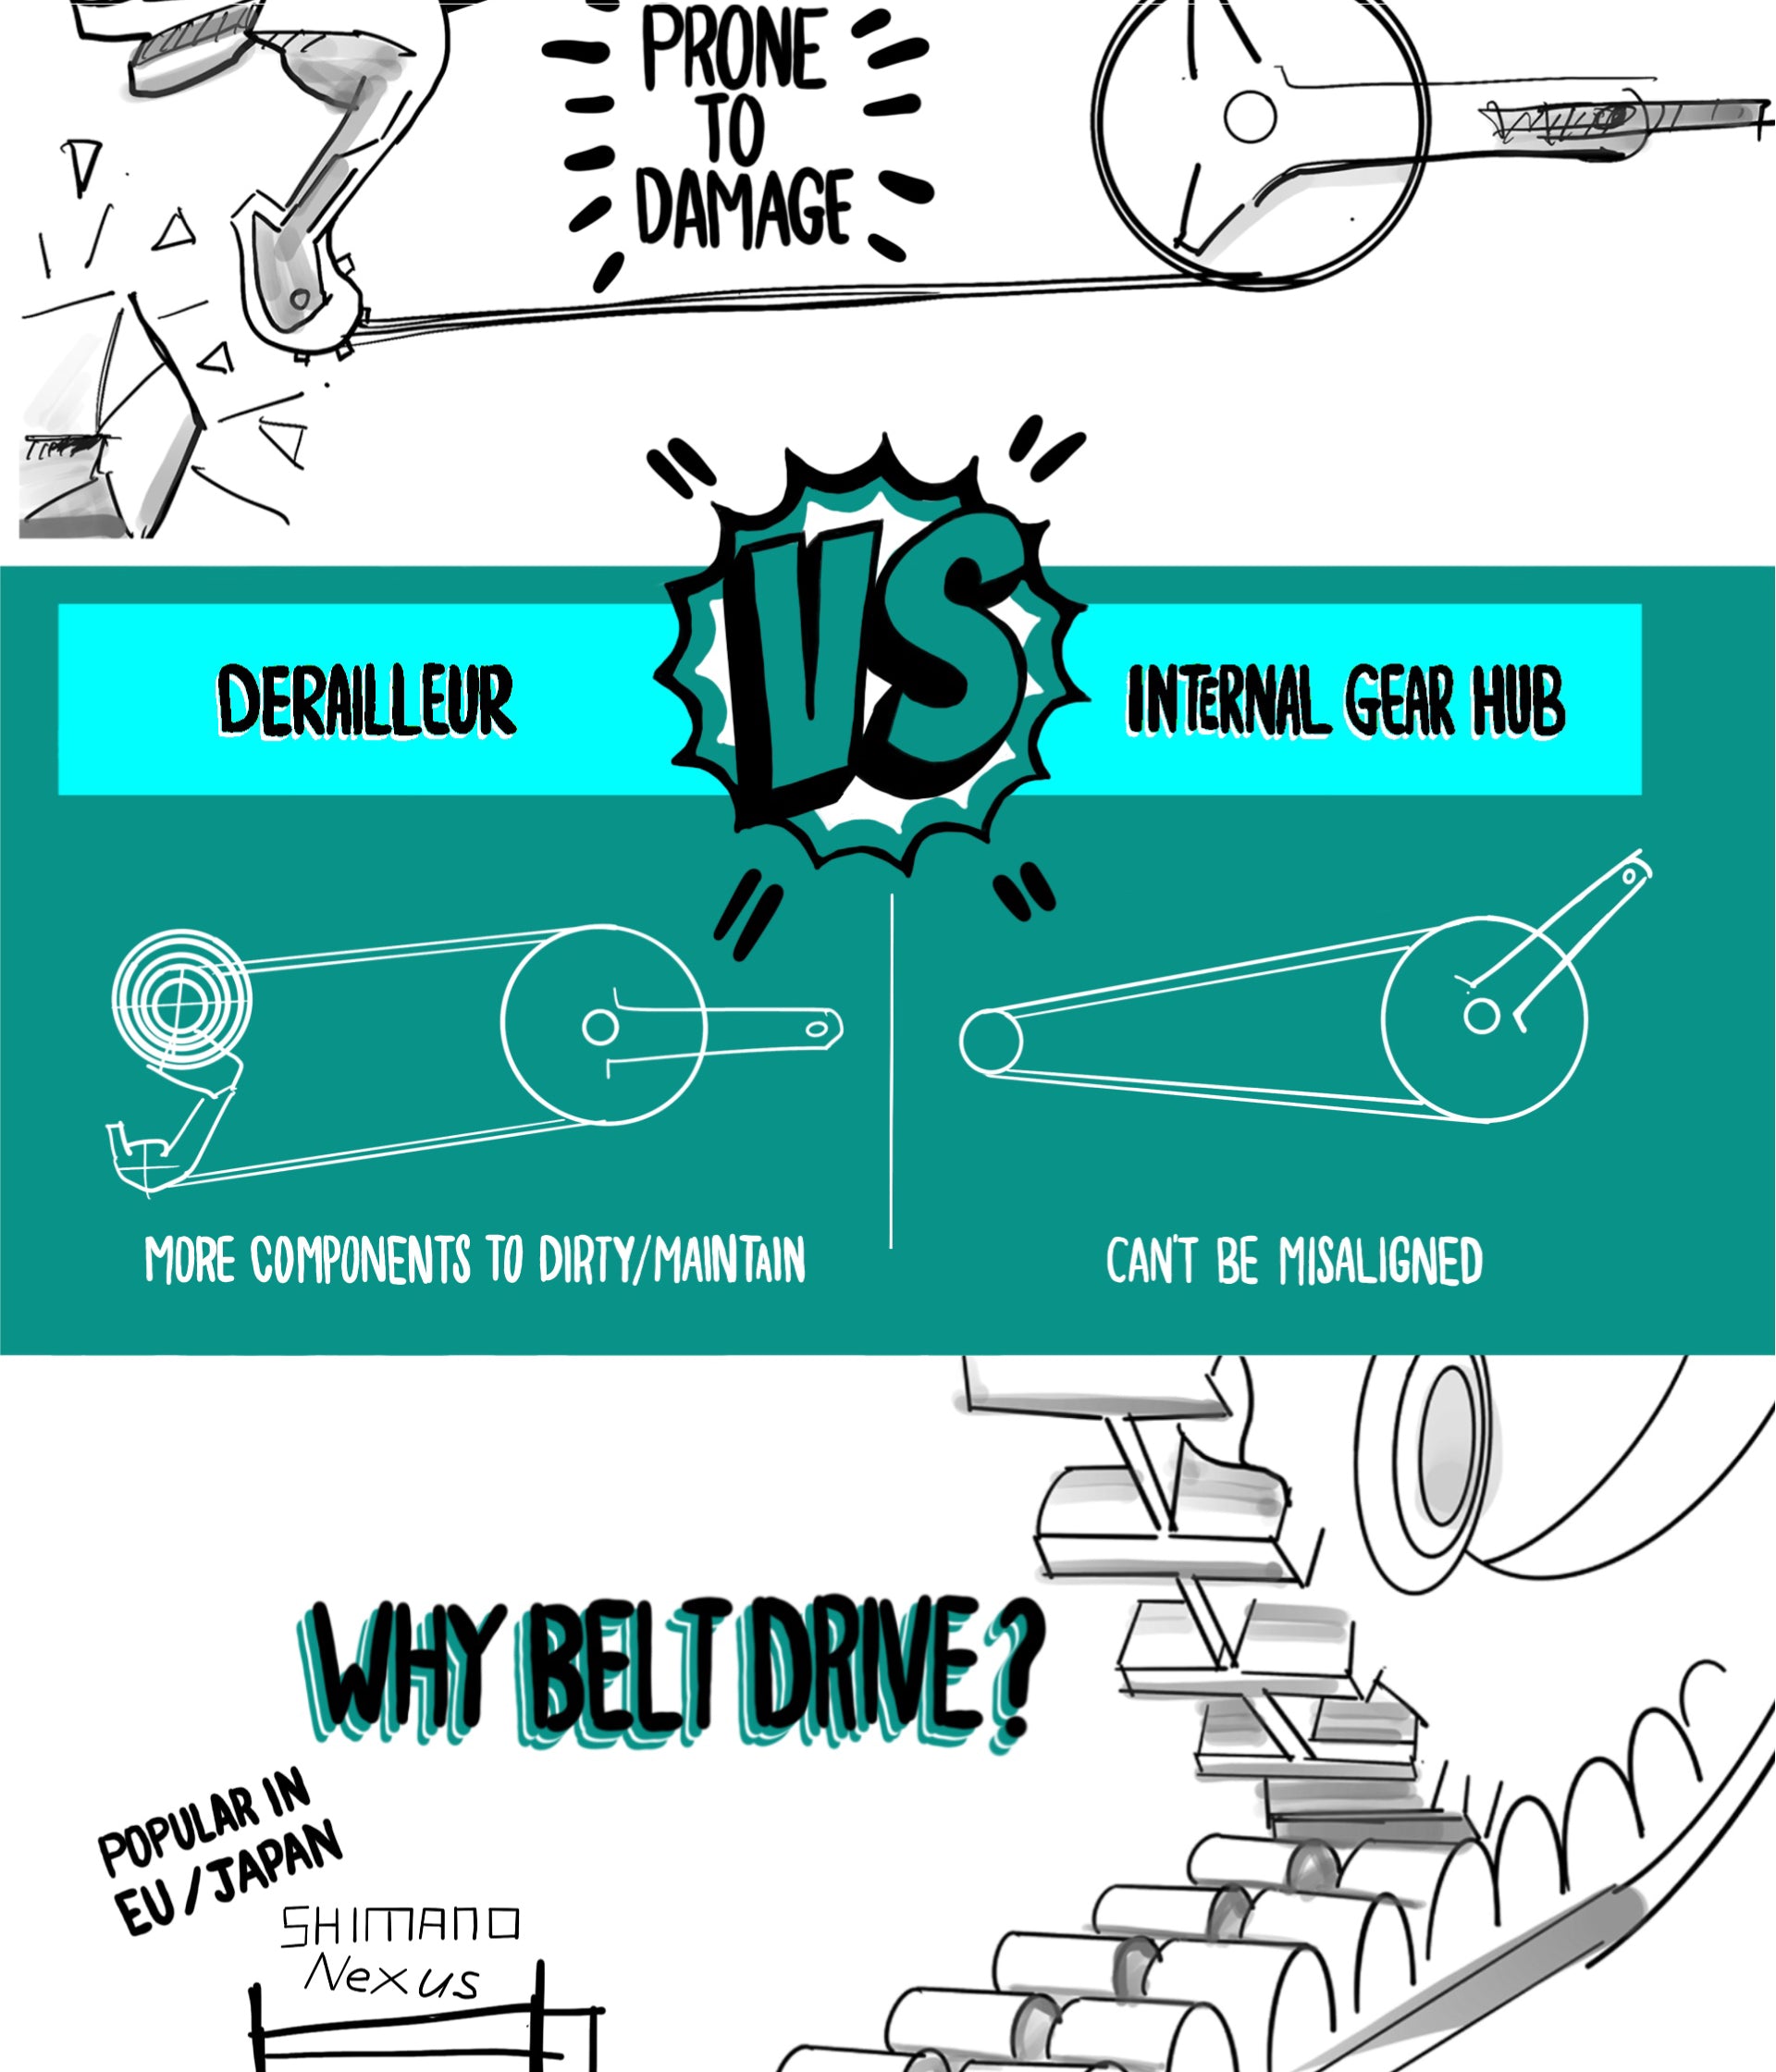 Advantages of a belt drive for bicycles